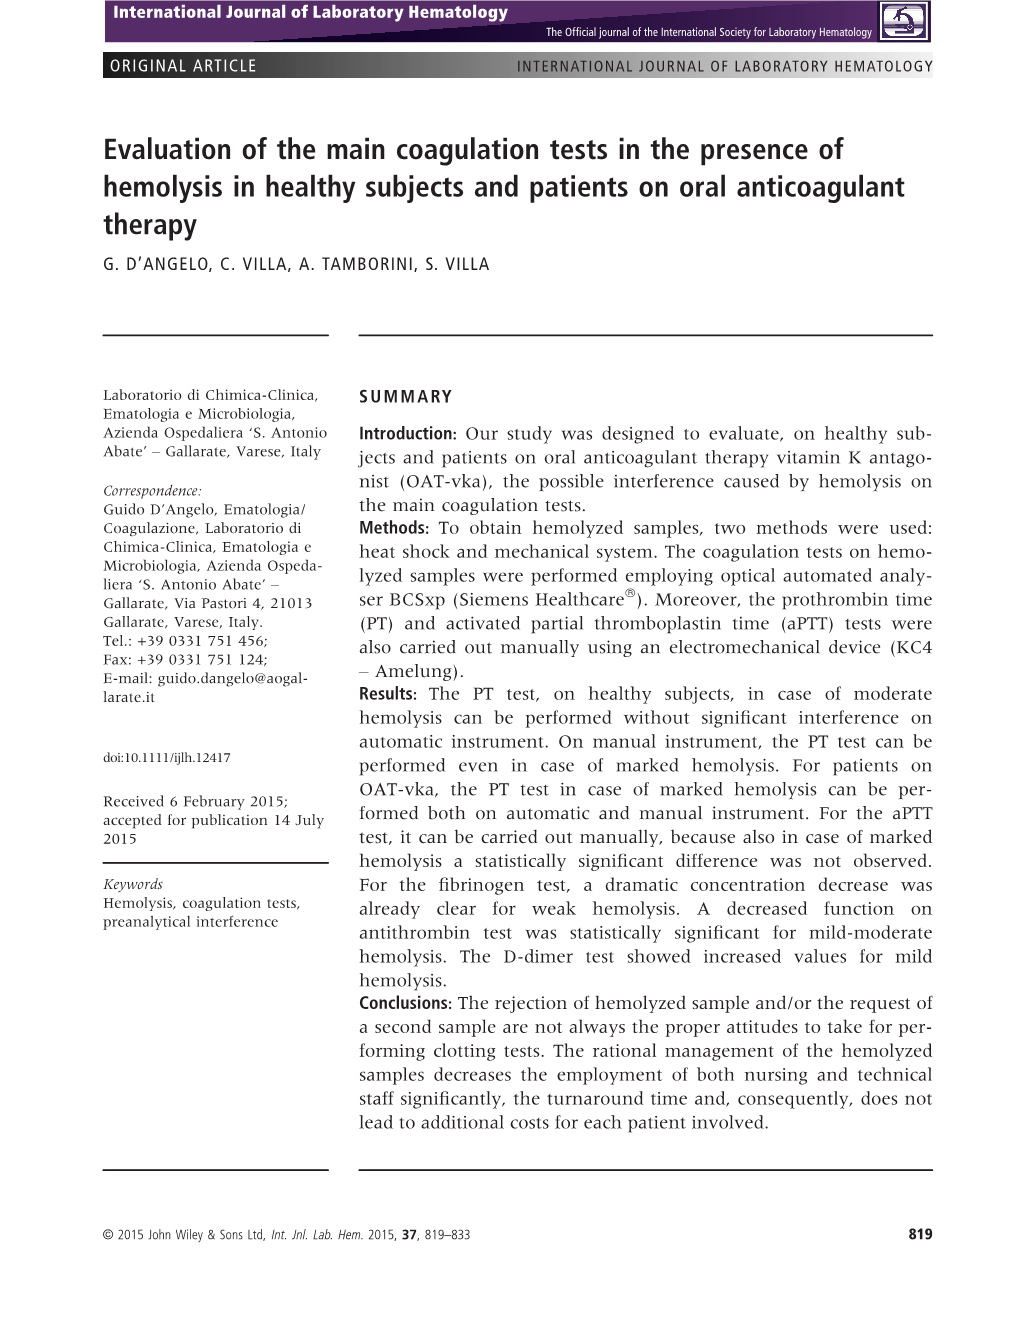 Evaluation of the Main Coagulation Tests in the Presence of Hemolysis